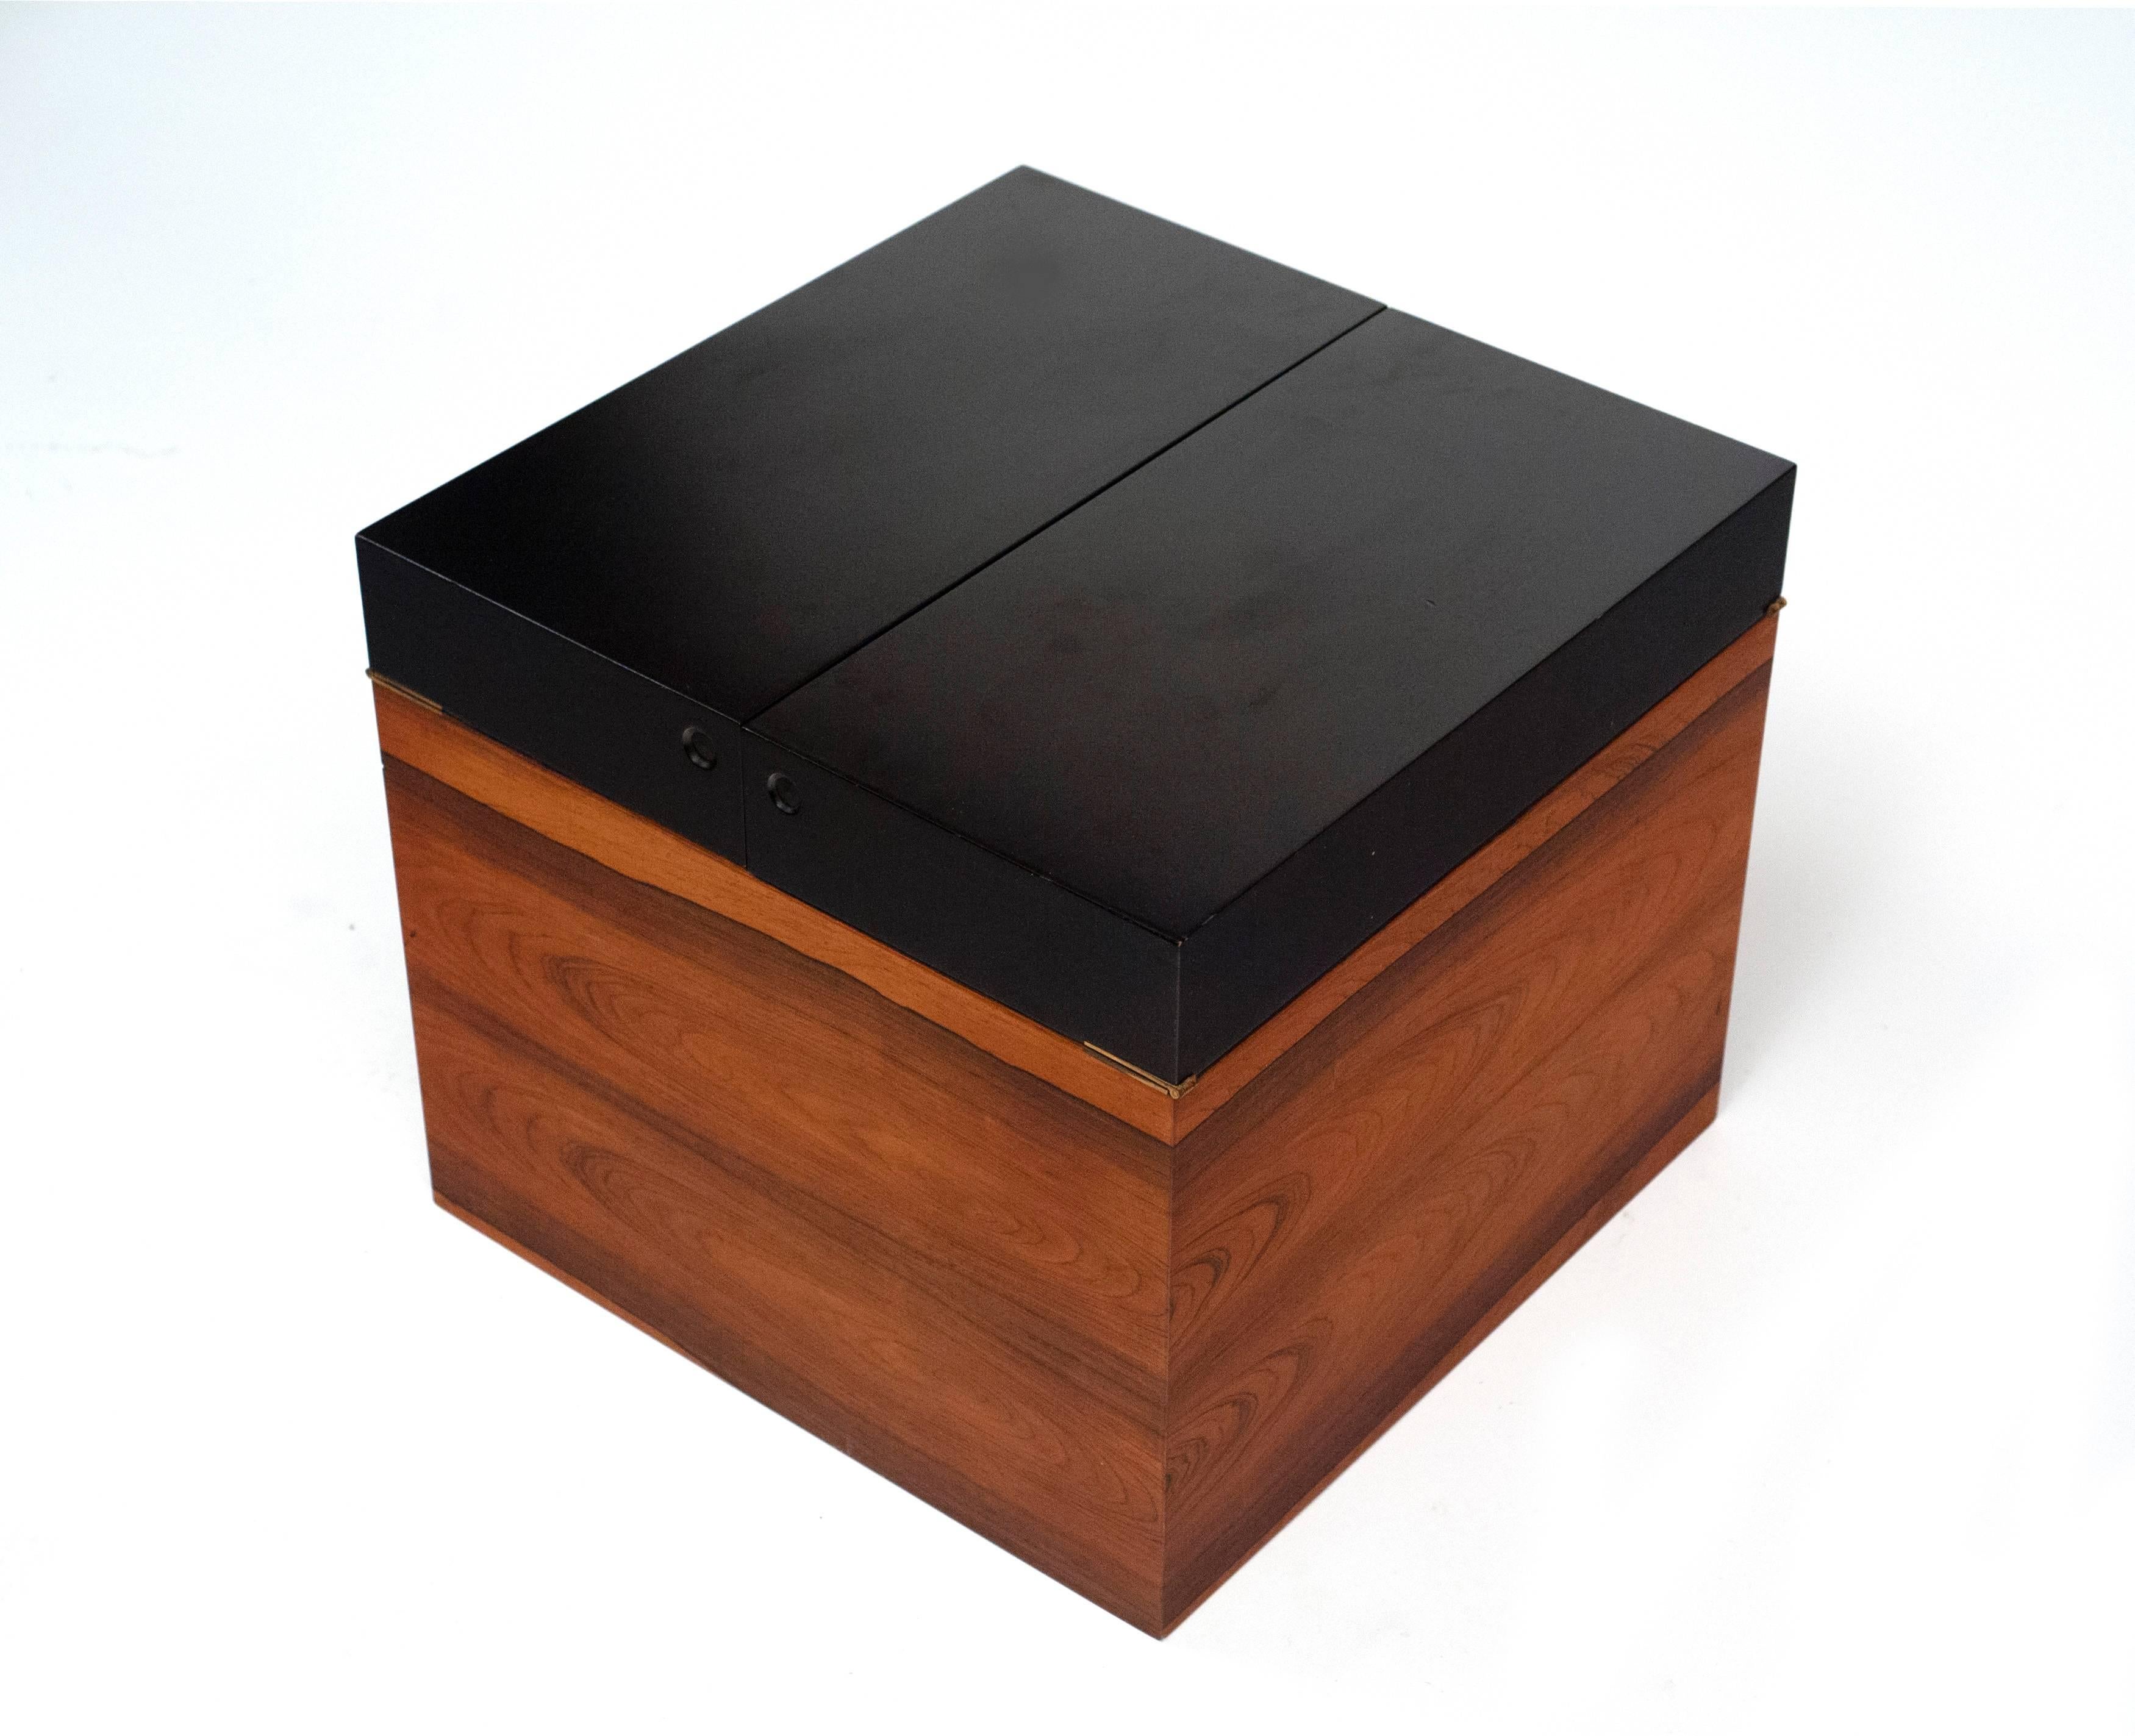 Attractive and functional rosewood box by Gunnar Myrstrand for Kallemo of Sweden. Black lacquered flip-top doors conceal a removable rosewood tray and solid brass hinges. Four round chrome casters allow it to be moved with ease. Box works well as a